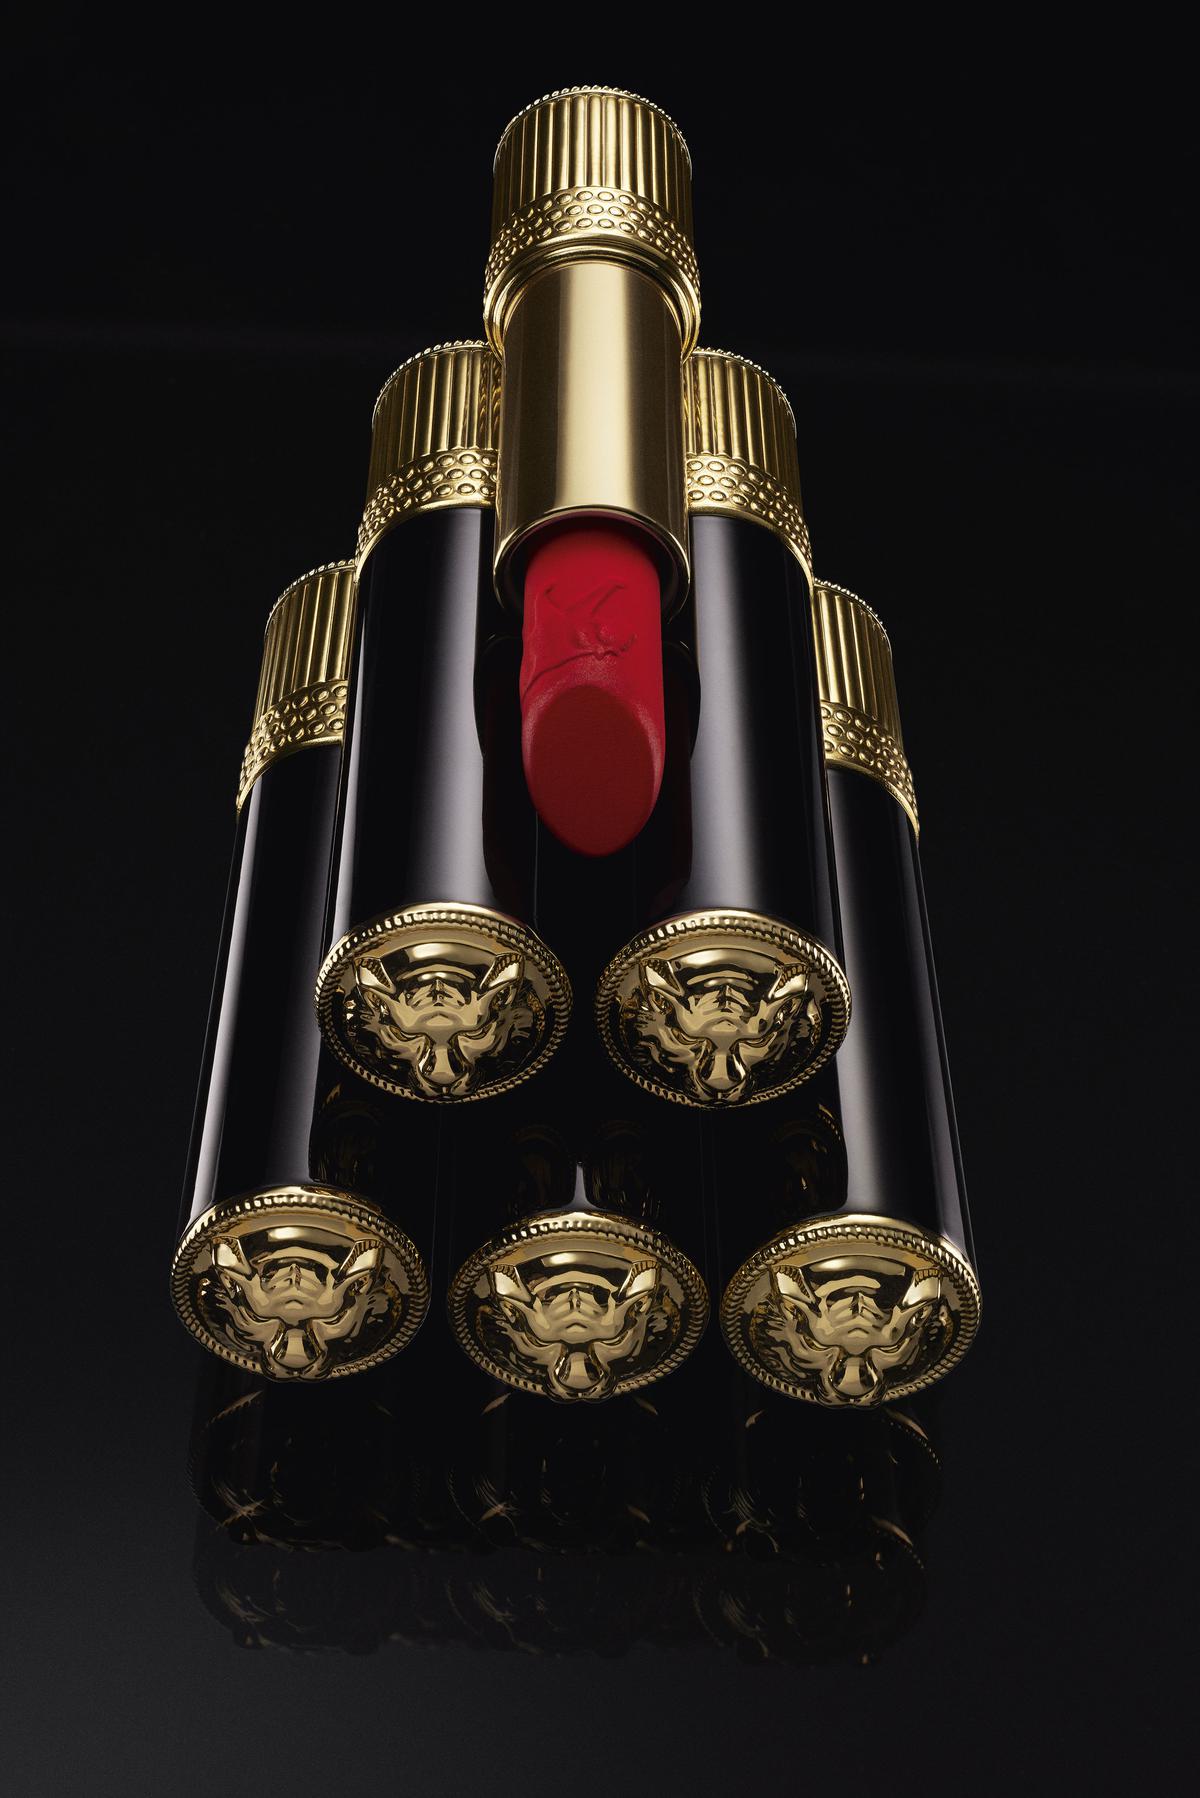 The lipsticks come in gilded cases with 24K gold-plated accents and the Bengal tiger embossed on top